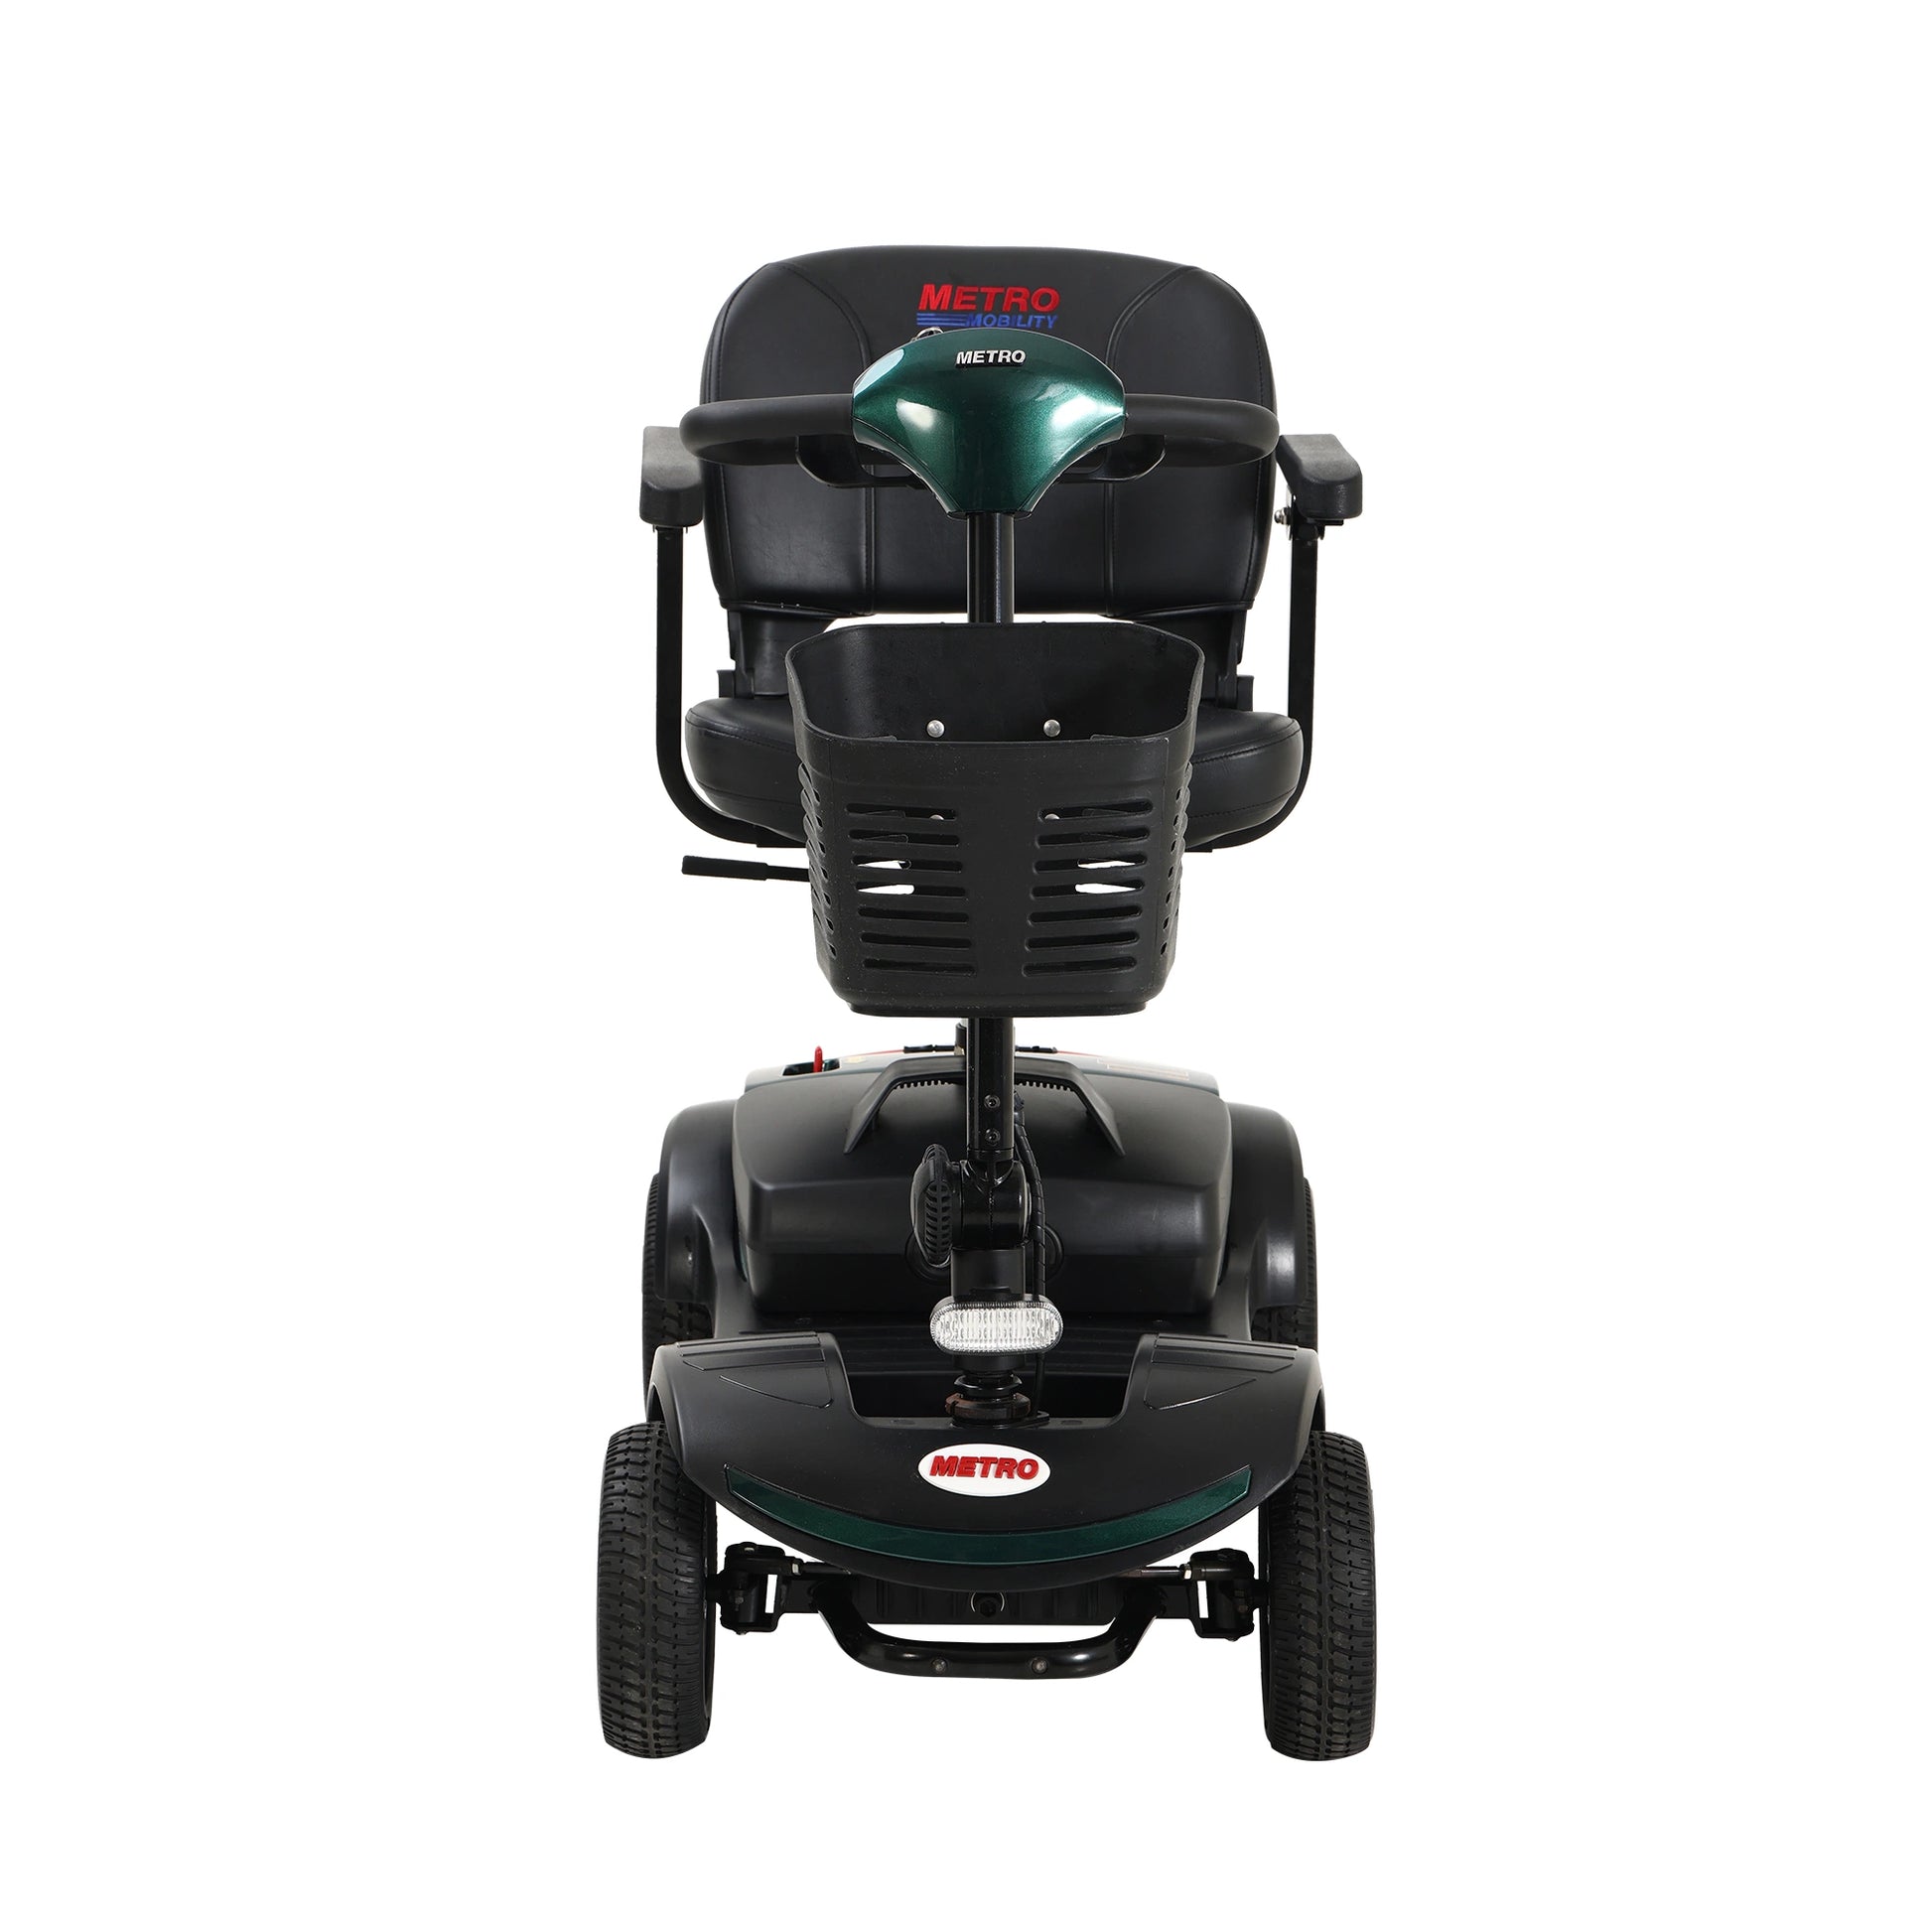 Lazy Bot™ W42933832 Compact Travel Mobility Scooter M1 EMERALD - Lazy Pro